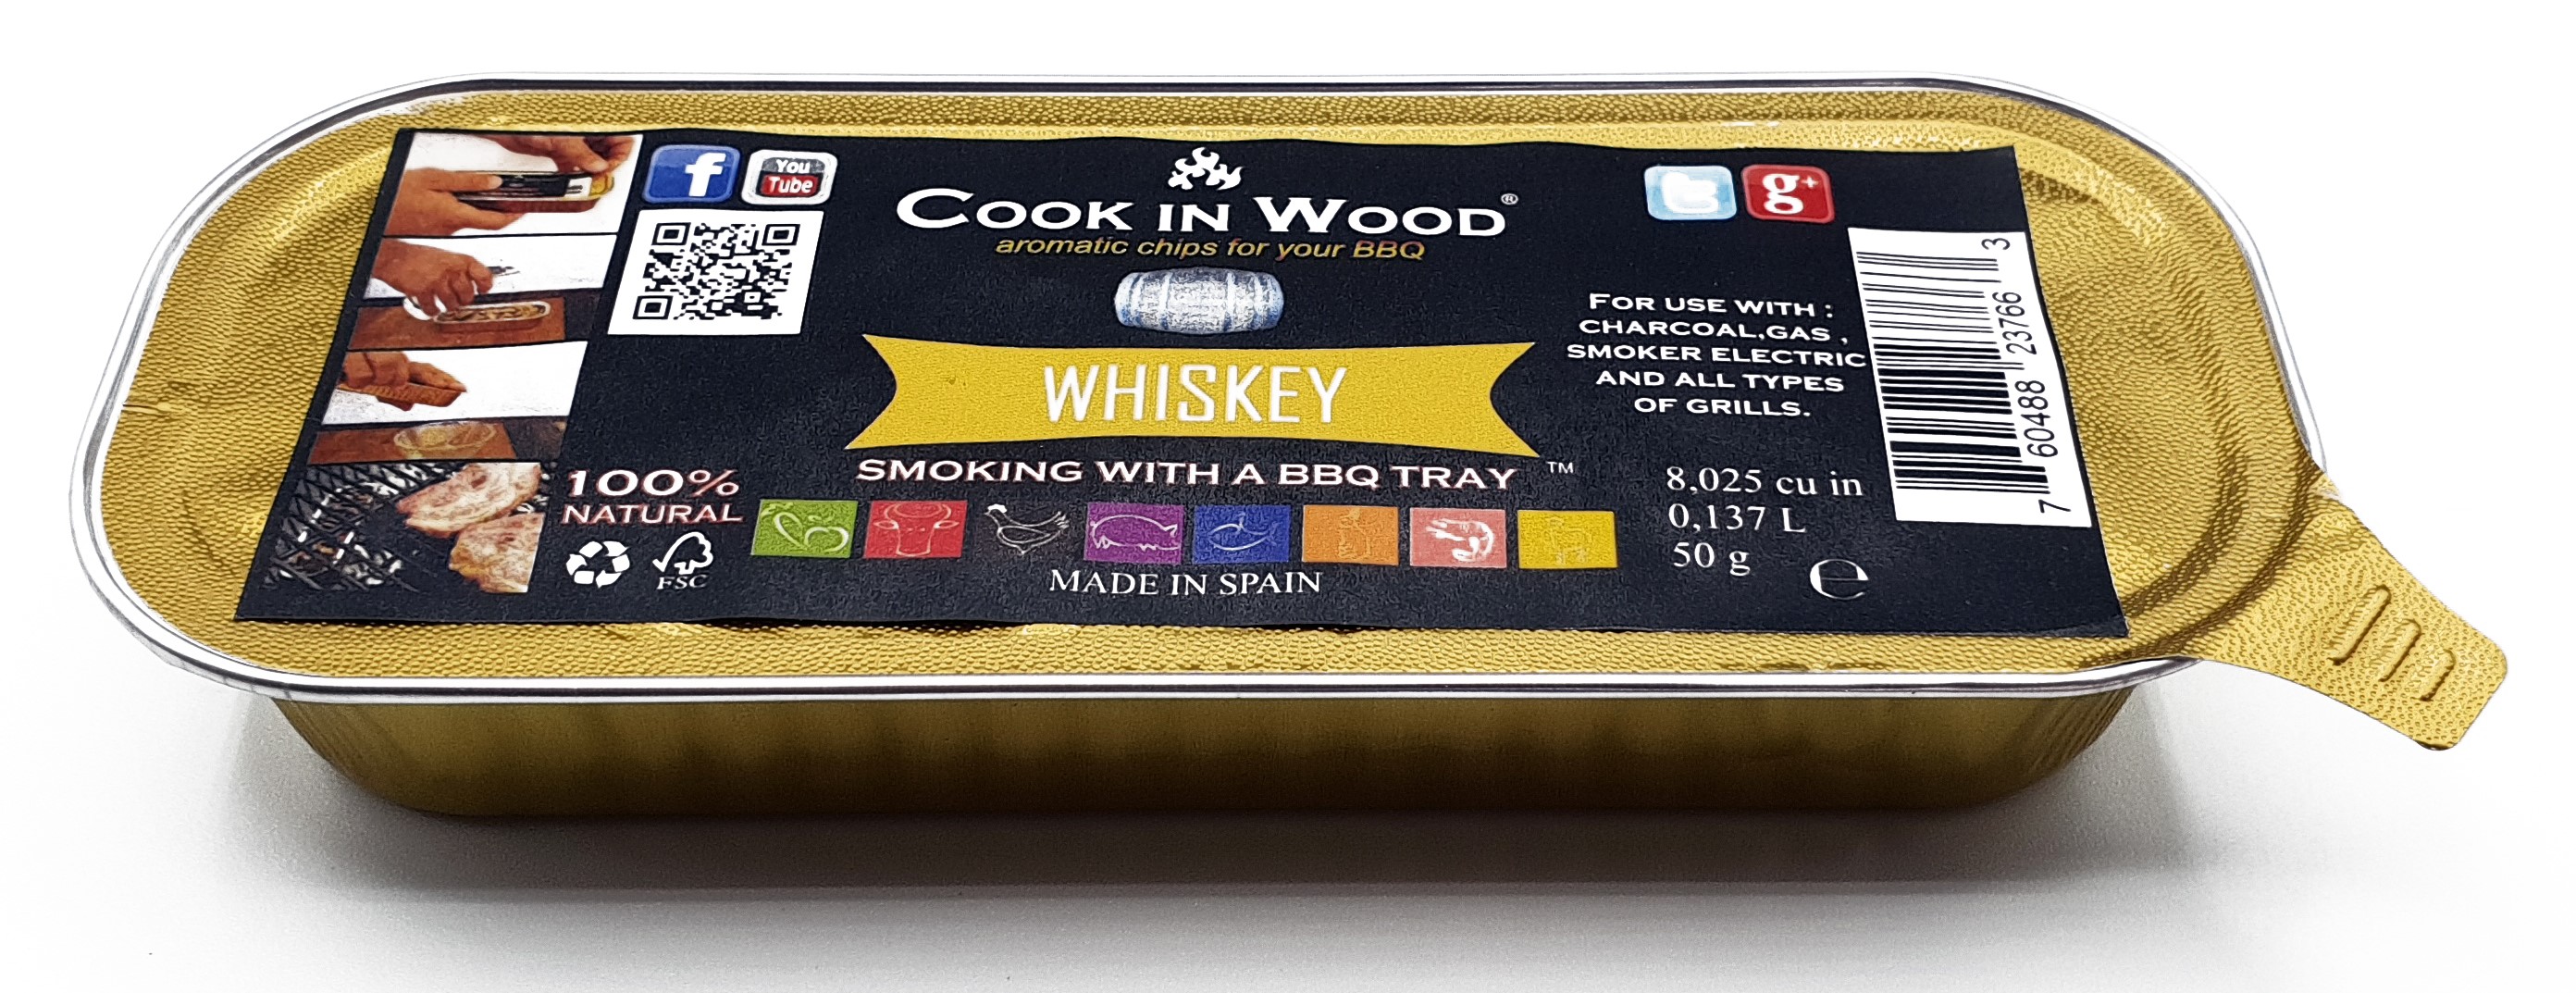 COOK IN WOOD 50GR CHIPSTRAY WHISKEY